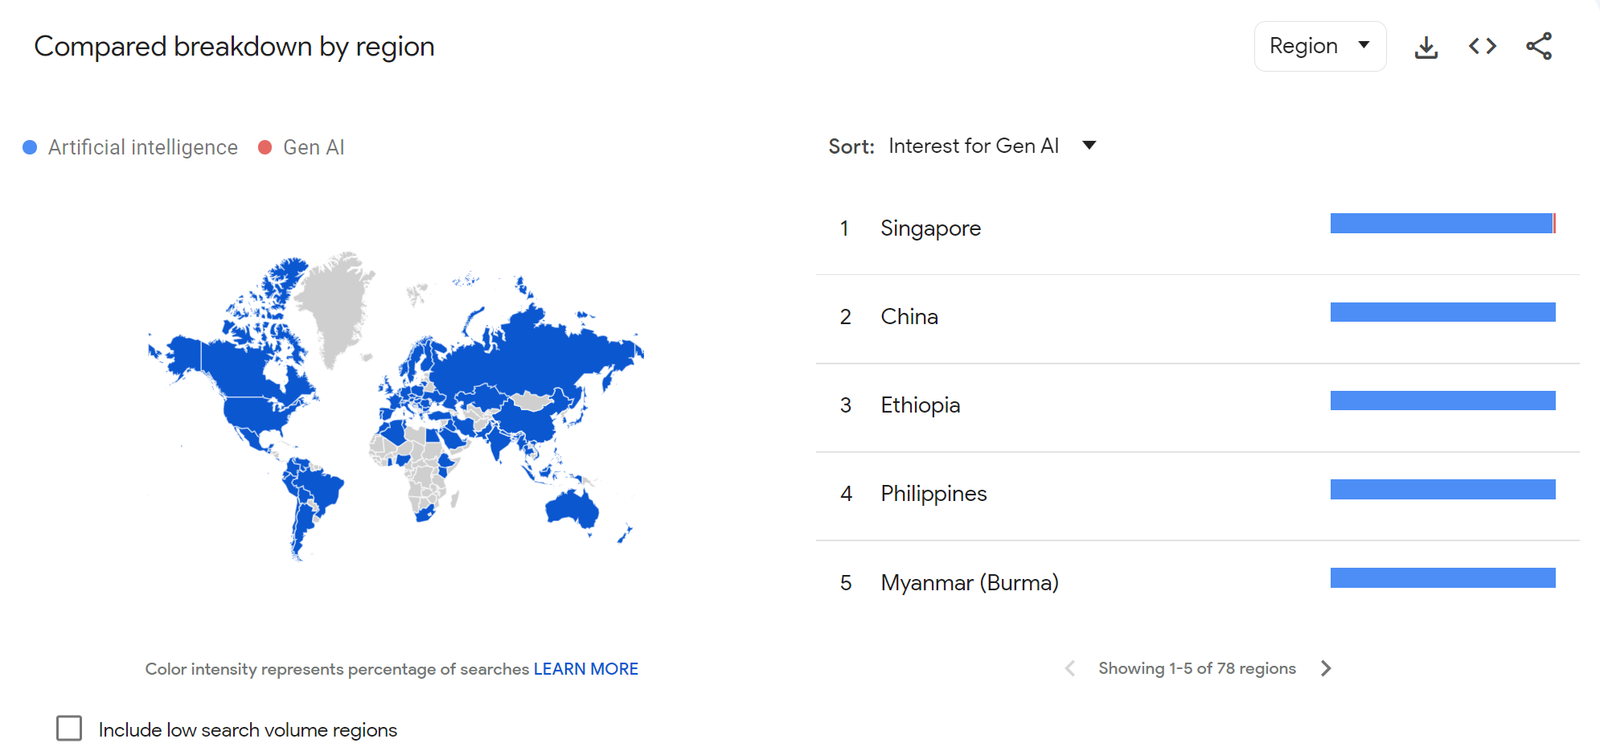 Philippines is third globally in searching for AI on Google